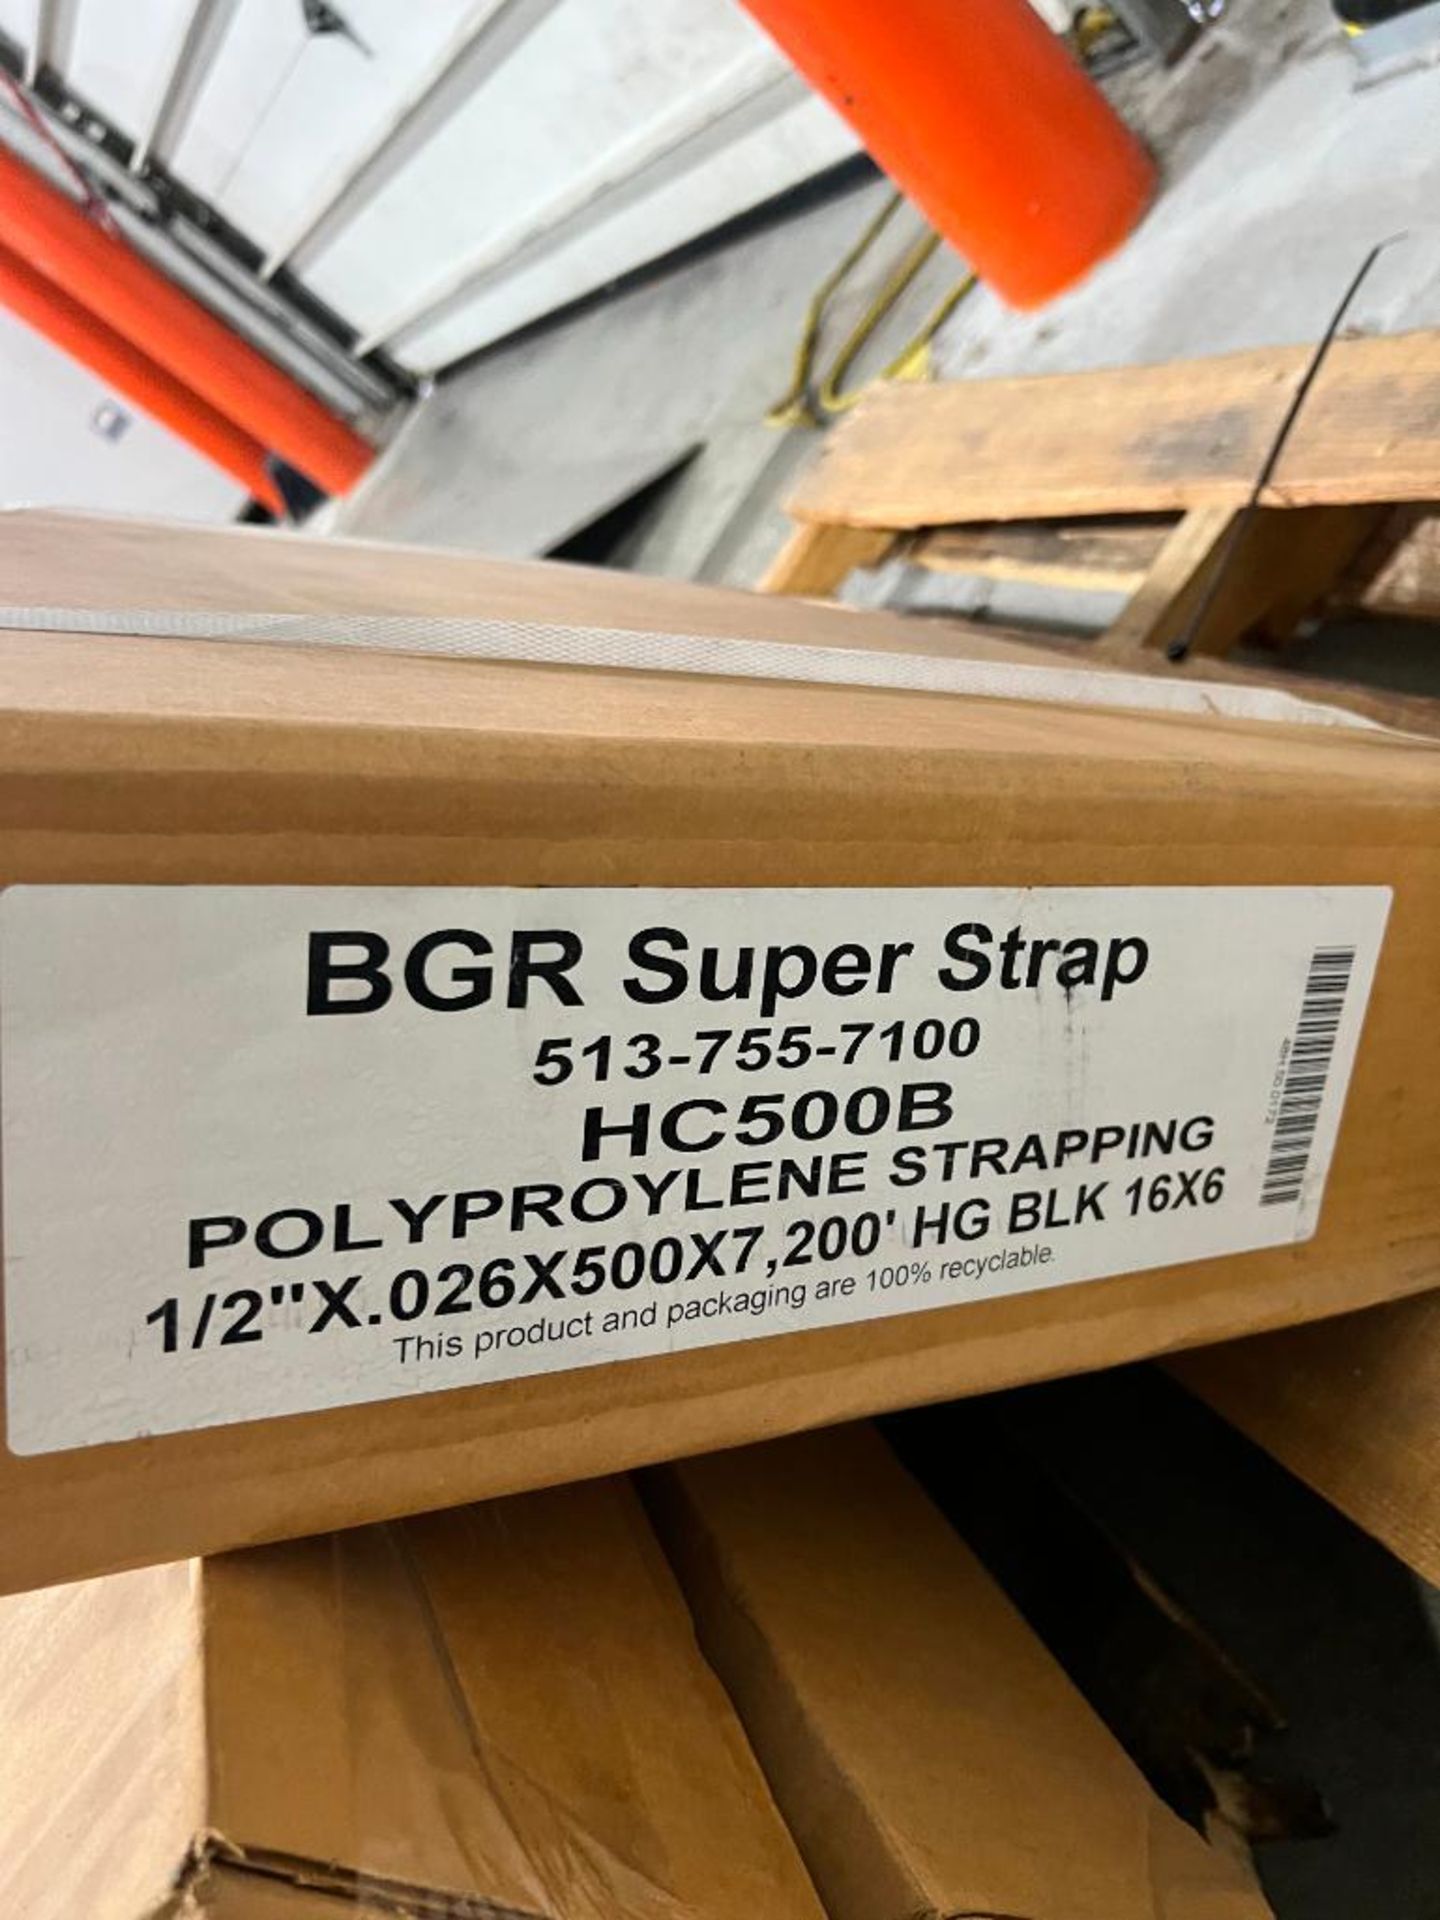 (3) (New) Boxes of BGR Super Strap Polypropylene Strapping